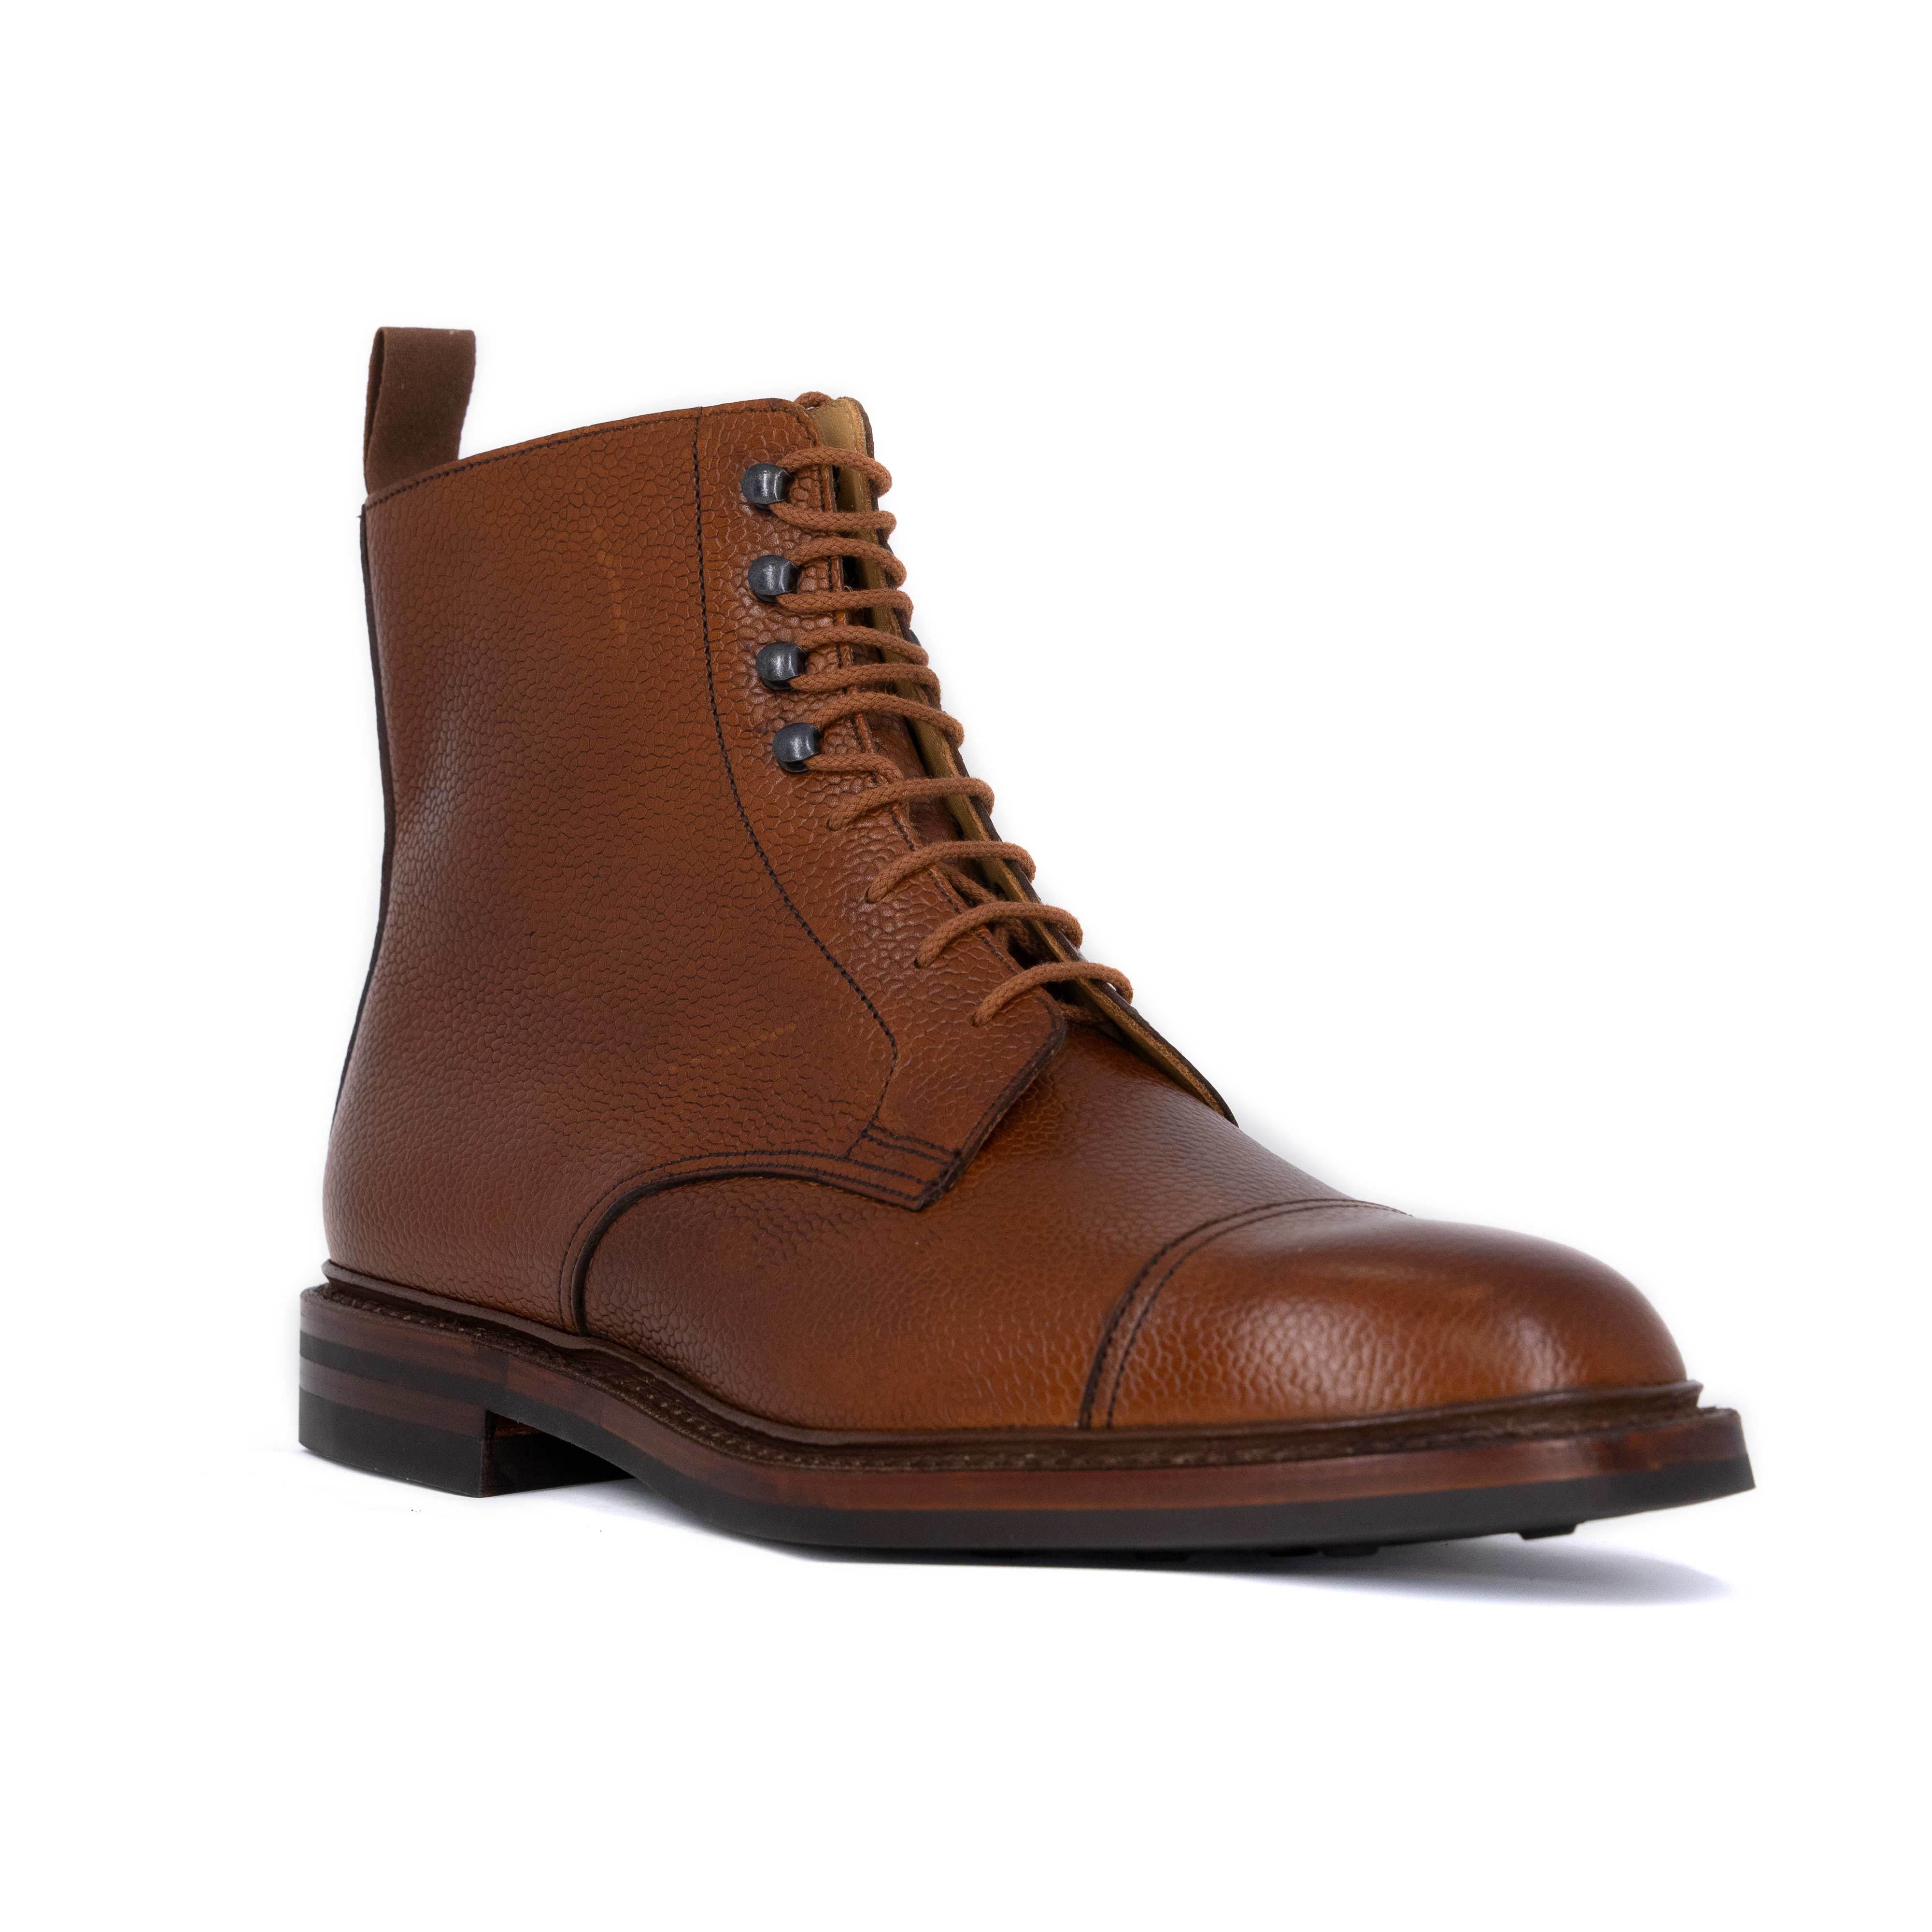 Lace up boots from BSC – British Shoe Company